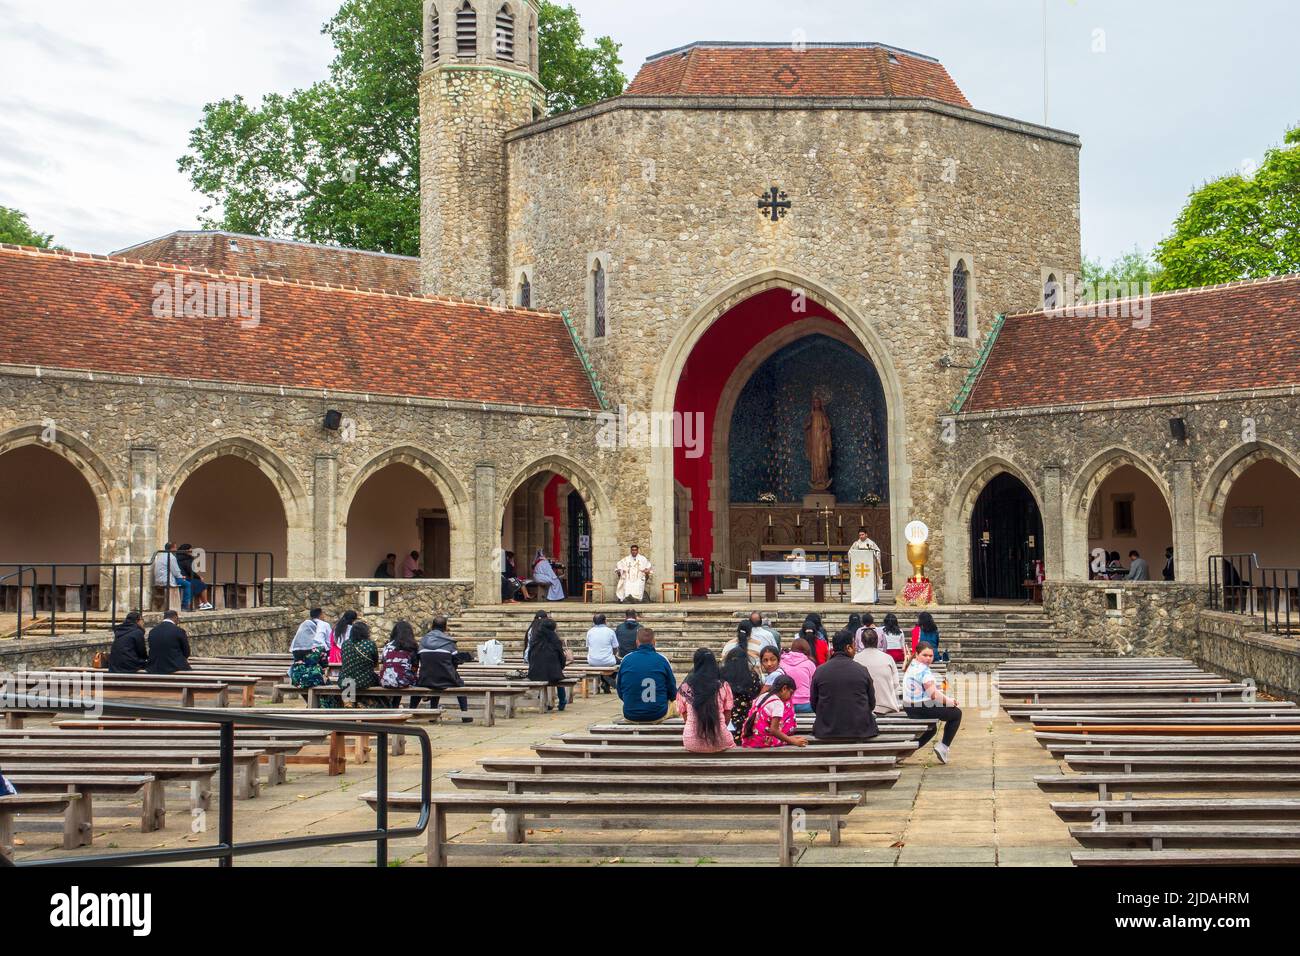 Religious Service,The Friars, Aylesford The Friars is the home to a small community of Carmelite Friars, who first came here in 1242. The Carmelites l Stock Photo